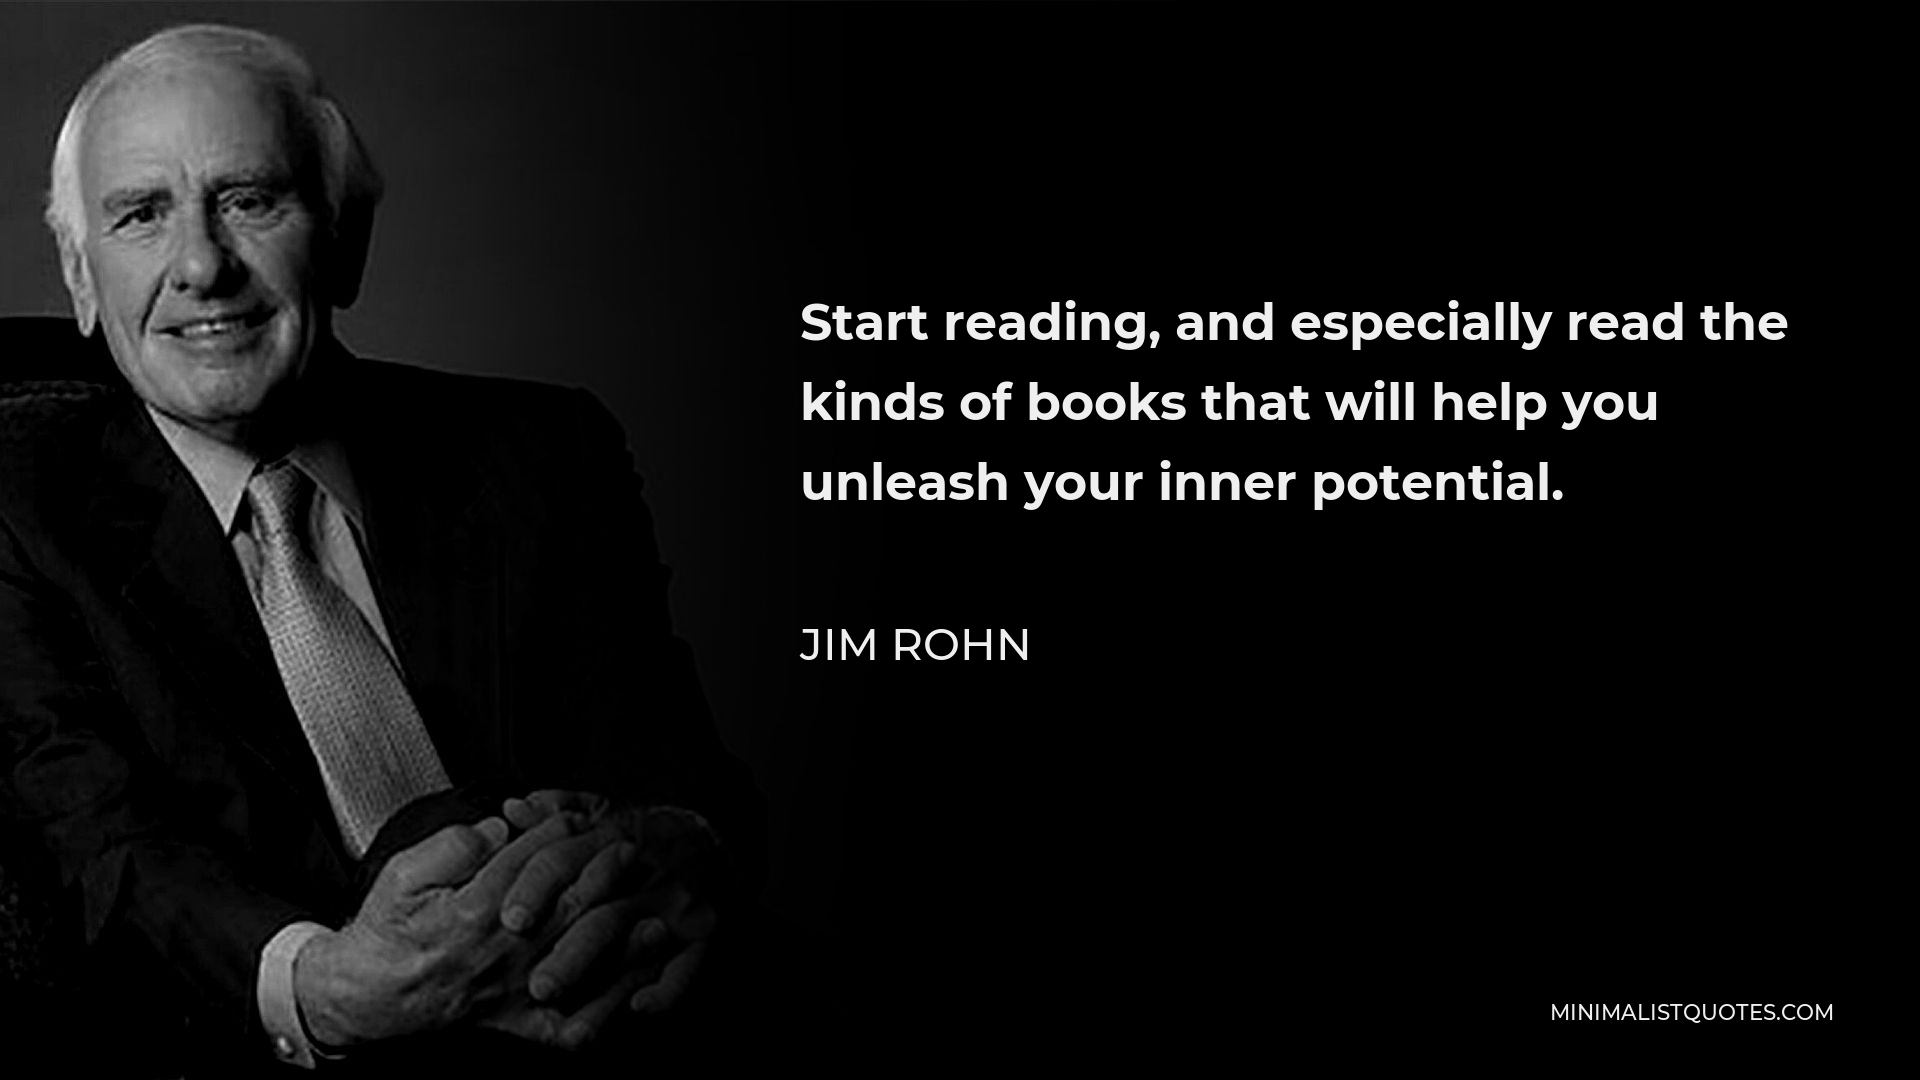 Jim Rohn Quote - Start reading, and especially read the kinds of books that will help you unleash your inner potential.